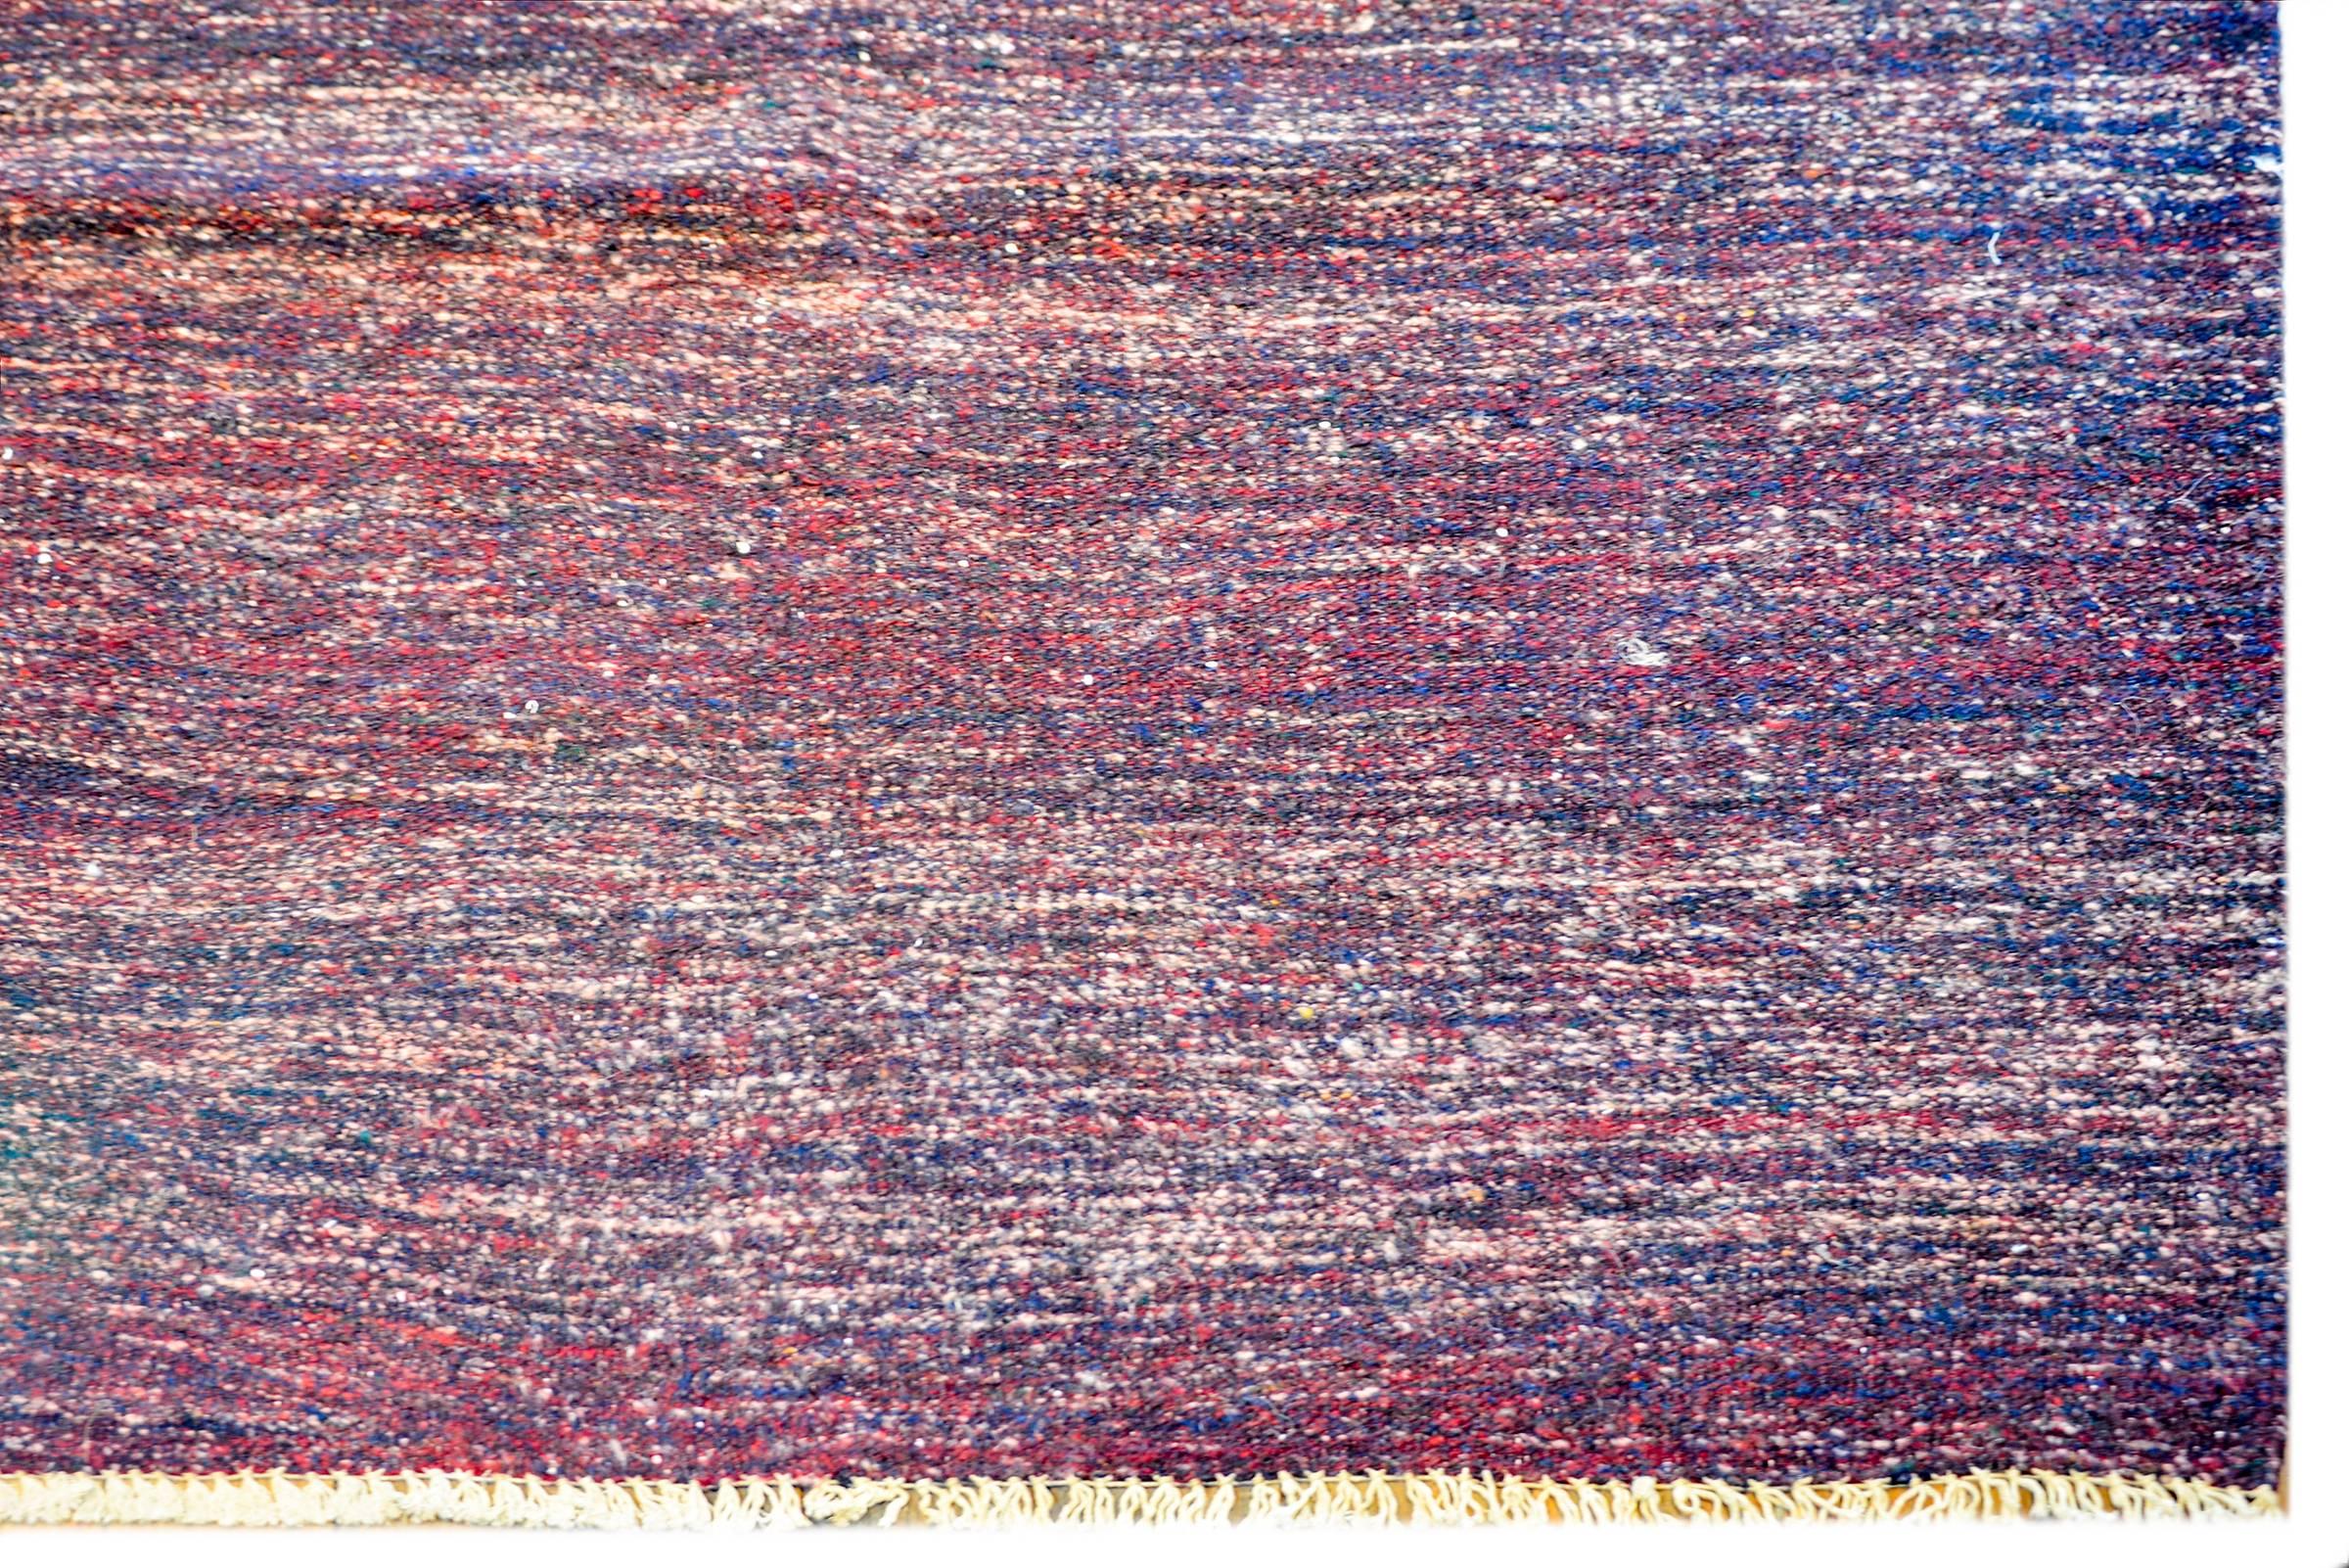 A fantastic vintage Persian Gabbeh Kilim rug woven in crimson and indigo wool with a simple whipstitched edge trim.